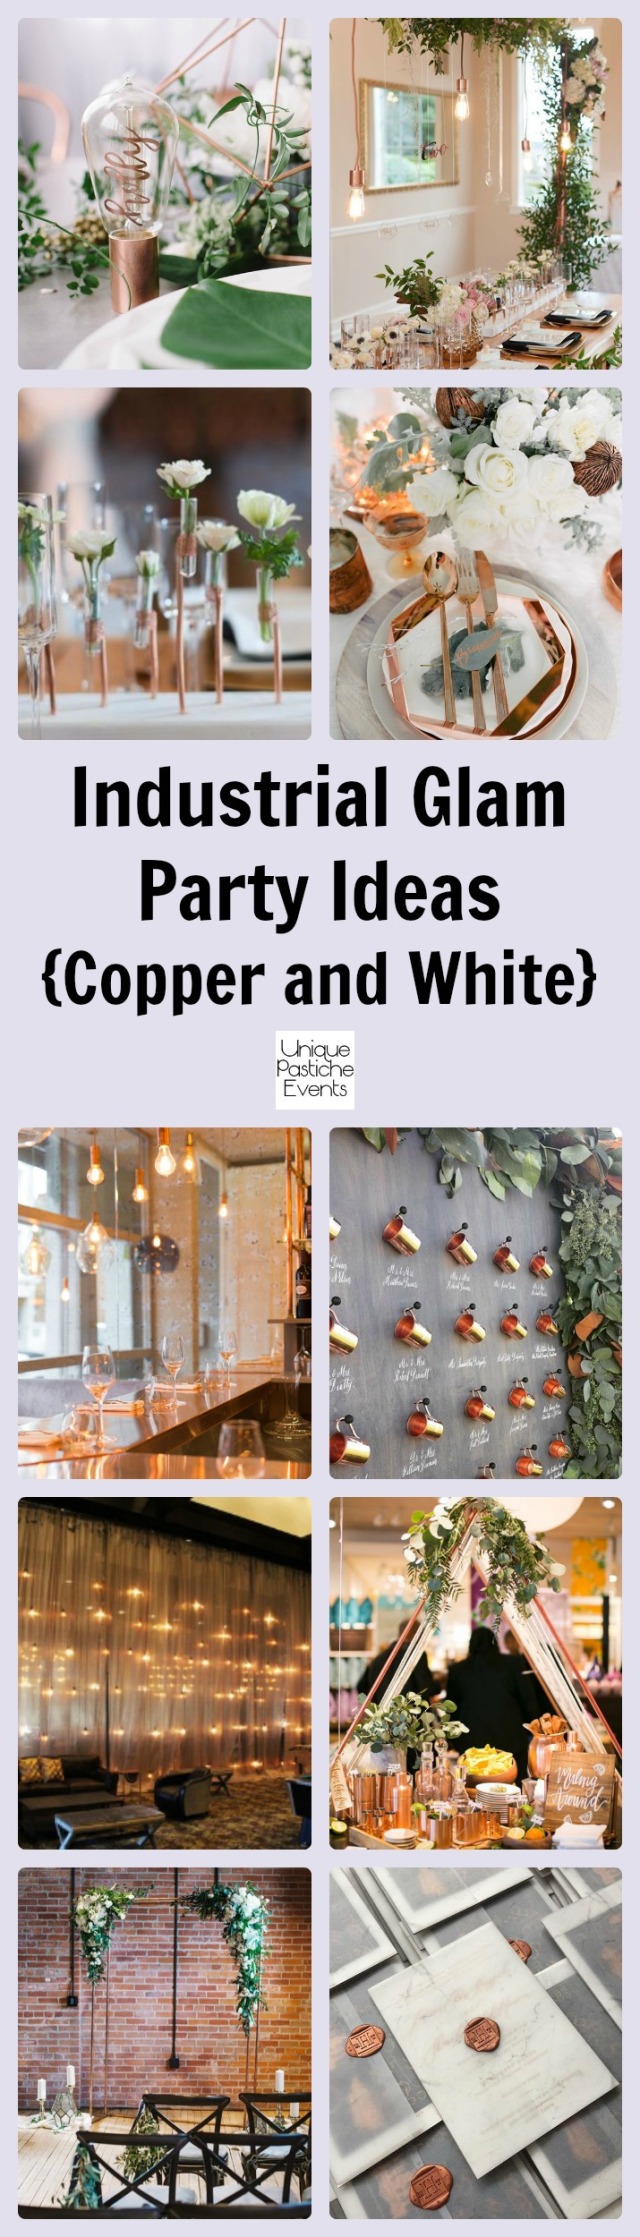 Industrial Glam Party in Copper and White